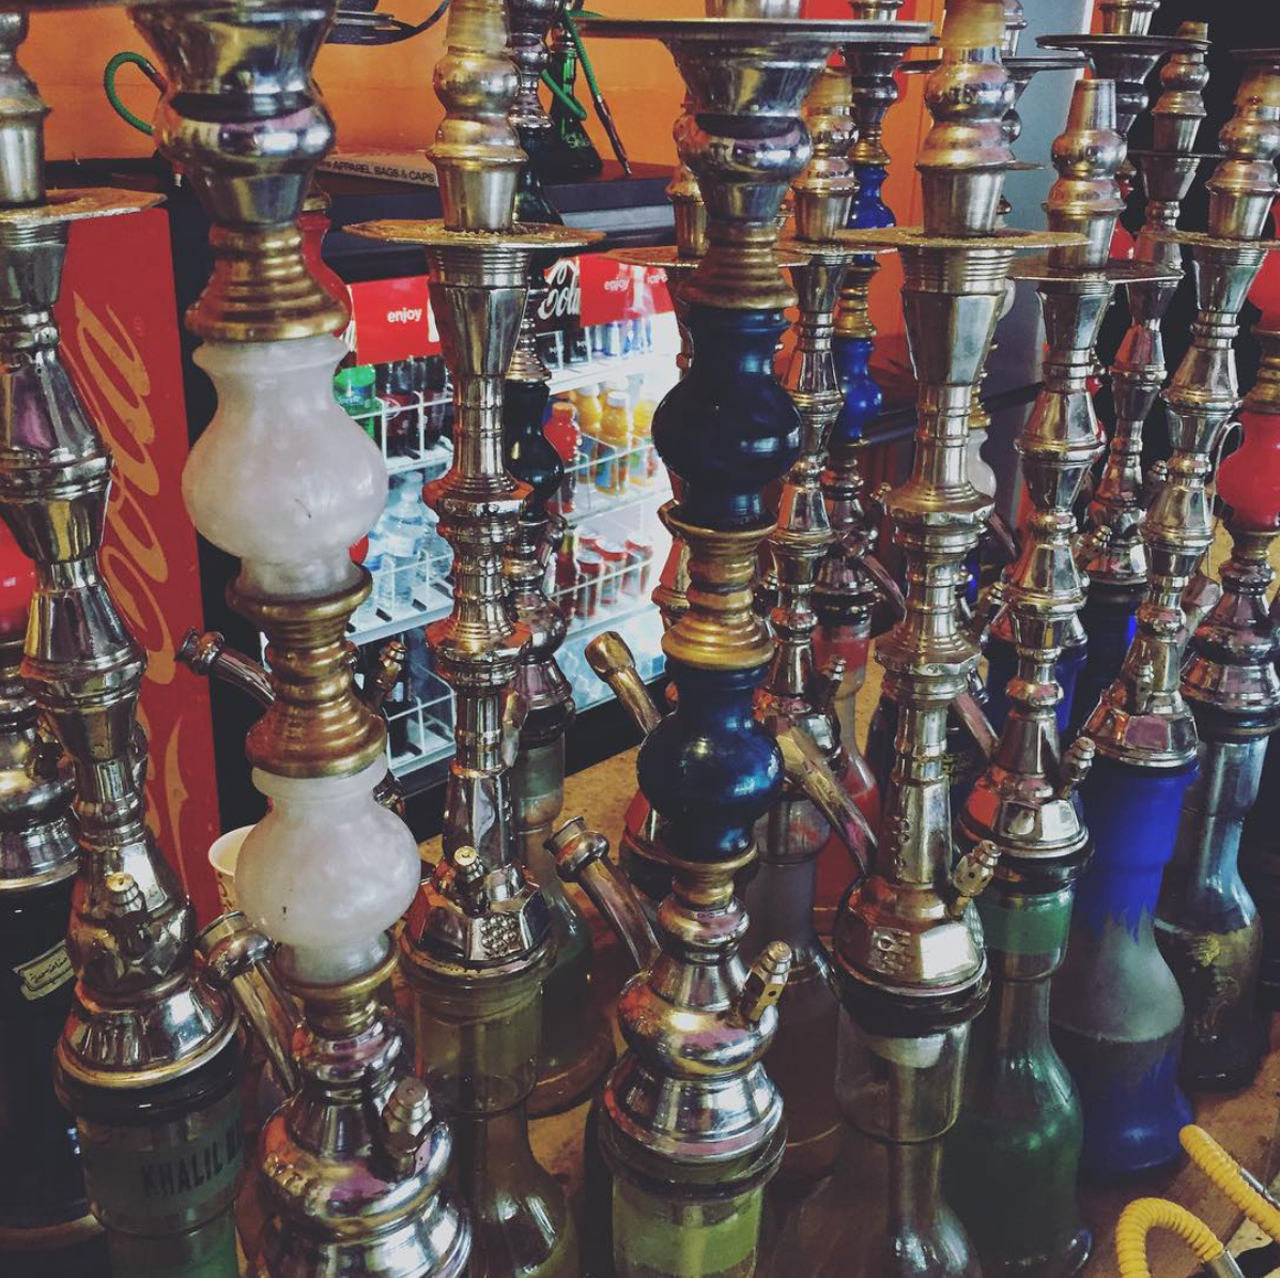 Habibi Cafe
5306 Broadway St., (210) 437-0242, facebook.com
While you’re relaxing with your hookah, you can also relax by bringing your own spirits. Perfect for a weekend get together, the fee is $10 per case of beer and $15 per bottle of other drinks. 
Photo via Instagram / sacurrent